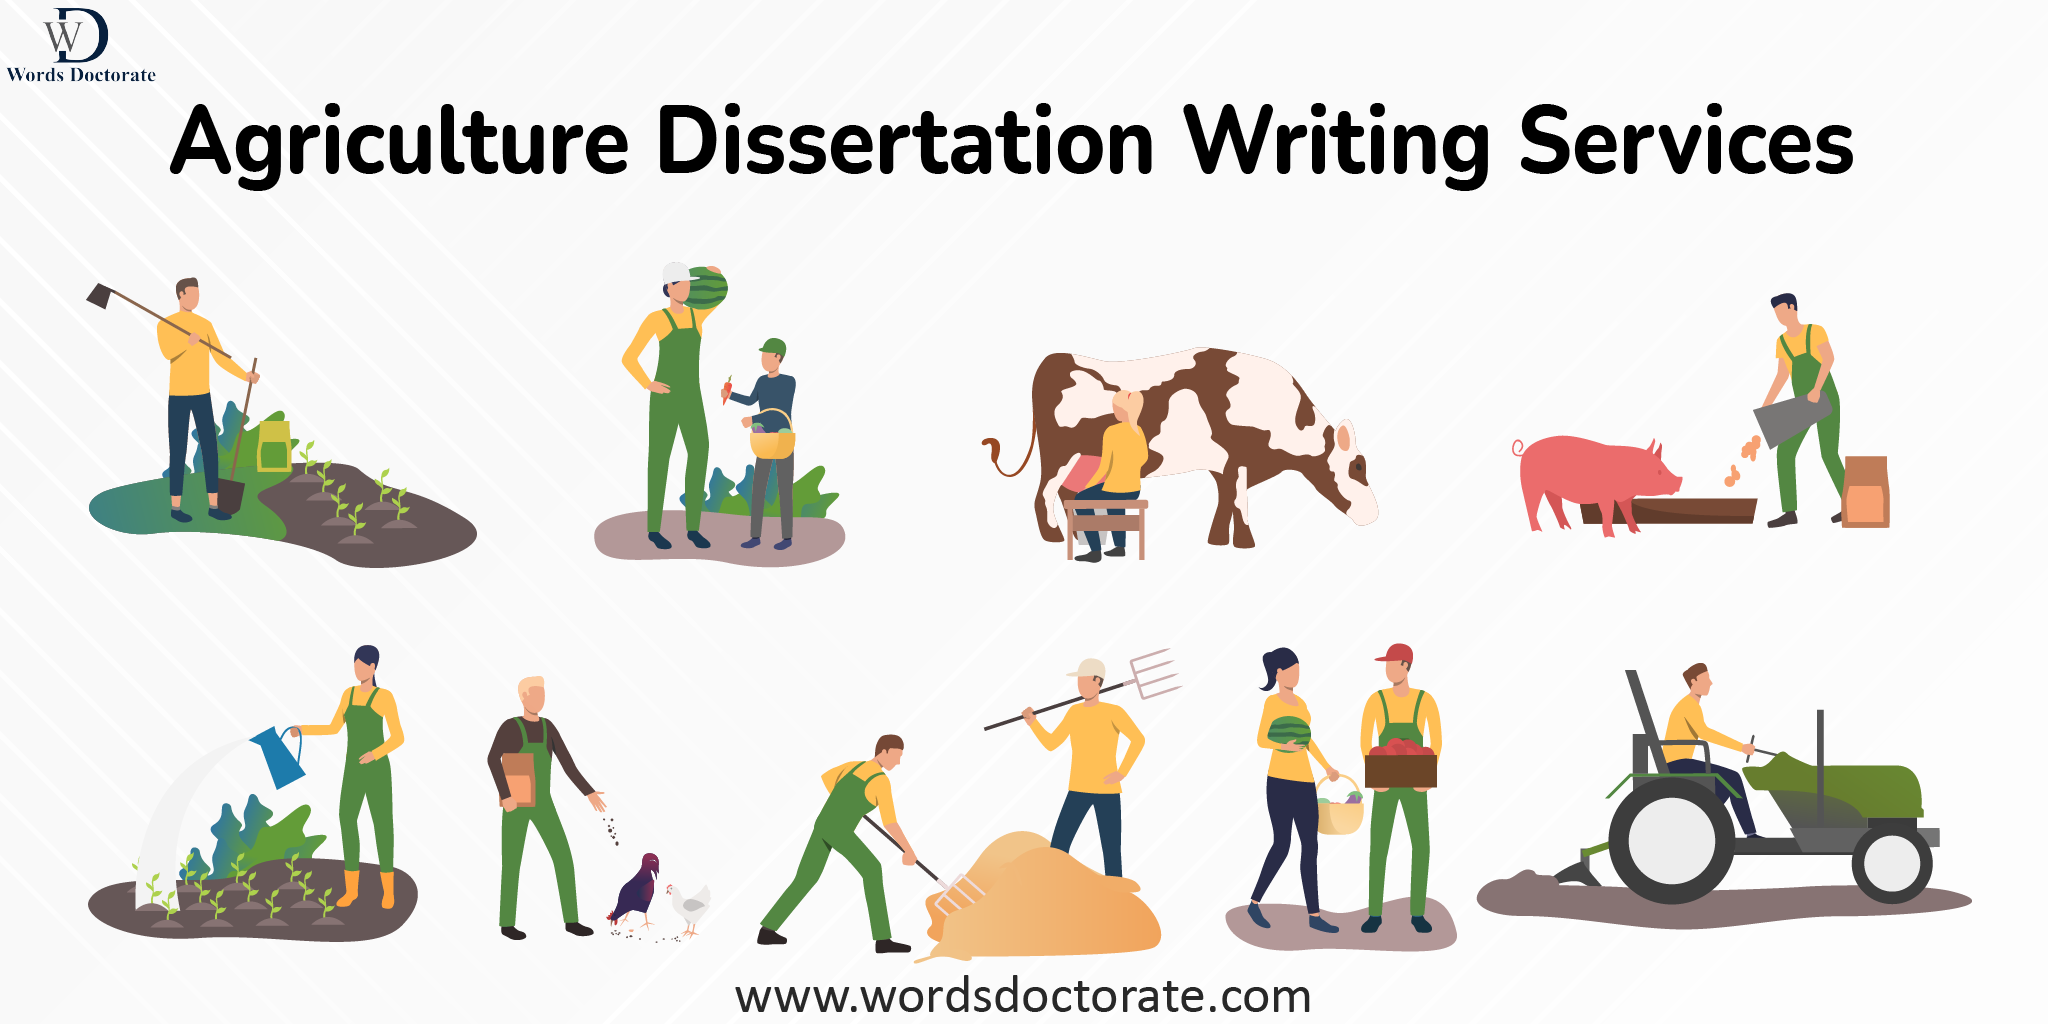 Agriculture Dissertation Writing Services